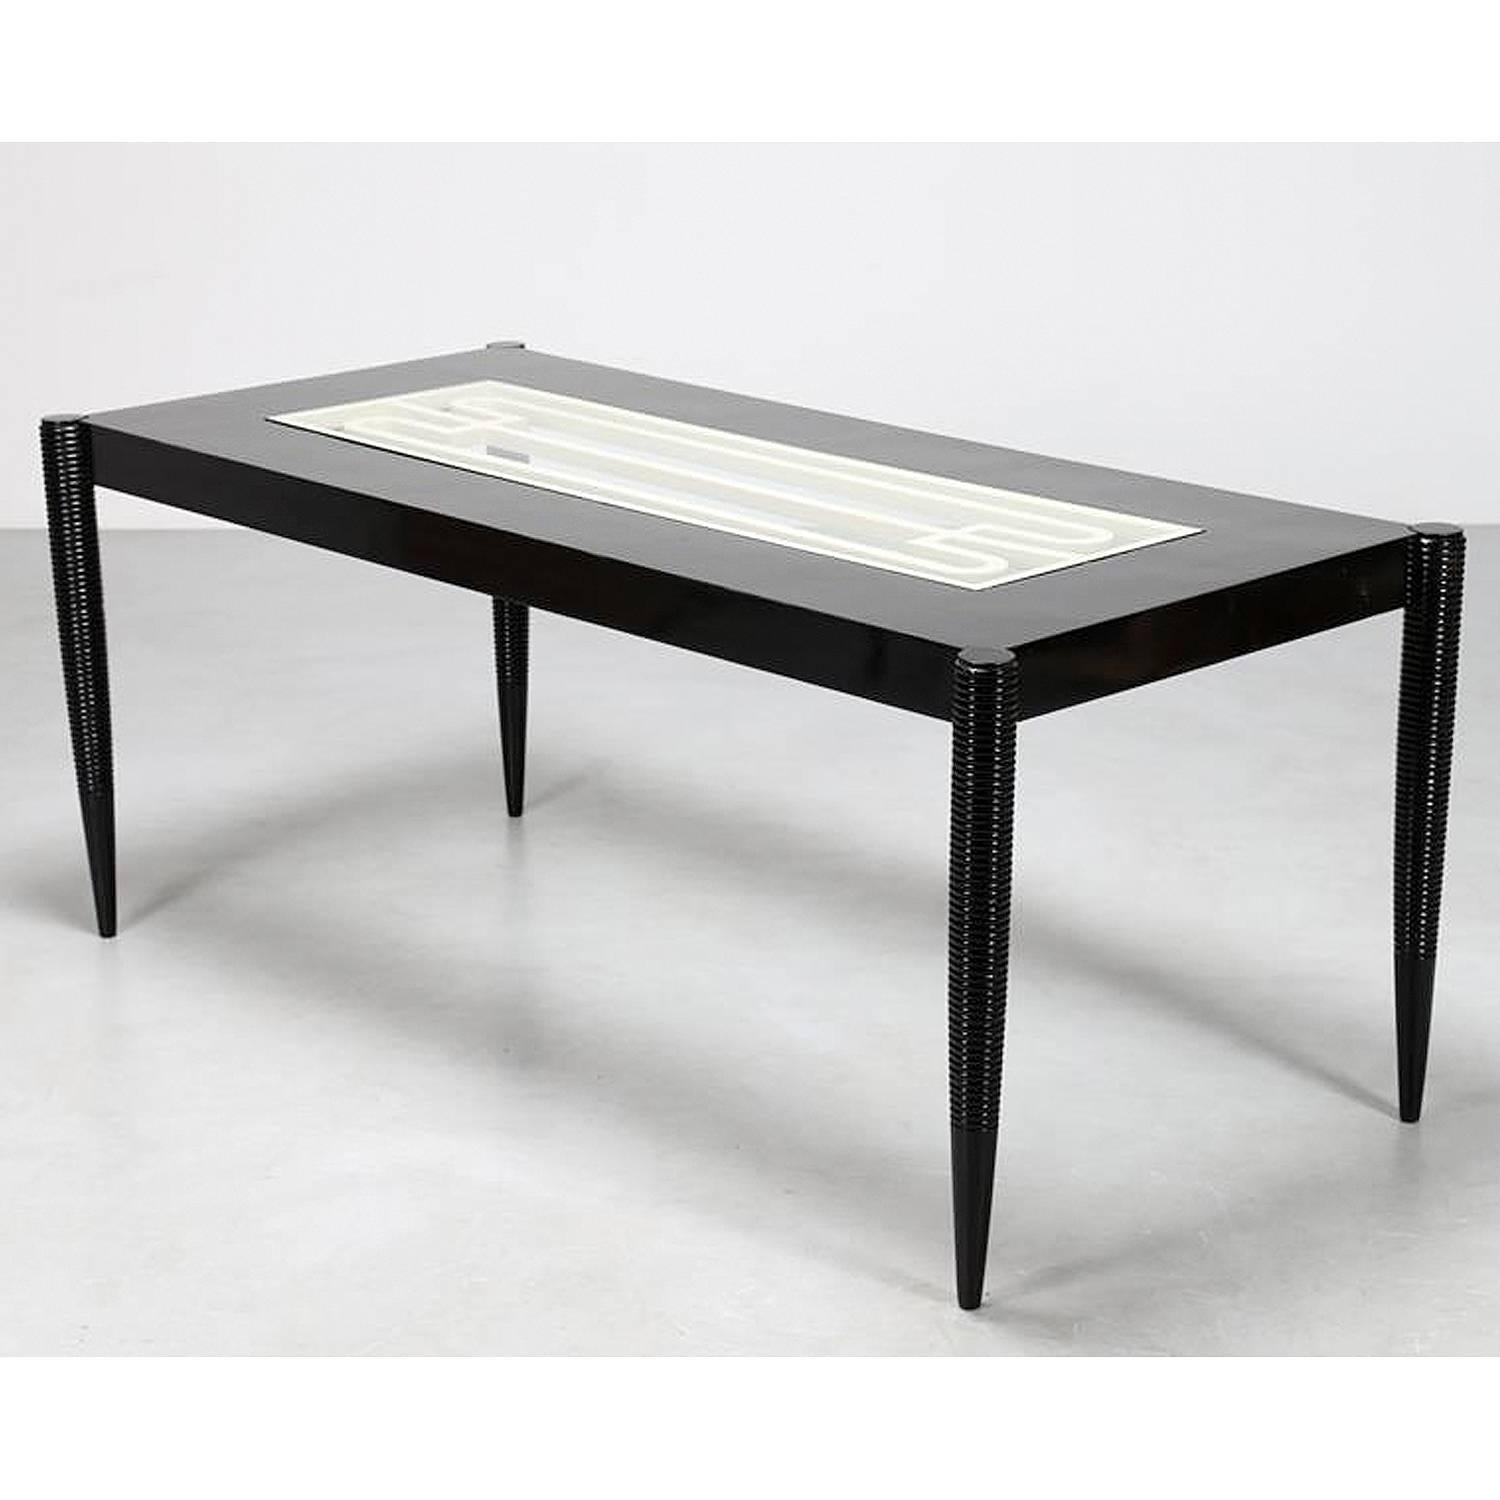 Stylish dining table attributed to Pierluigi Colli in the 1950s, characterized by structure in lacquered black wood with legs finished with superb reeds details ('grissinati’).
The tabletop, centrally, has a transparent glass under which is